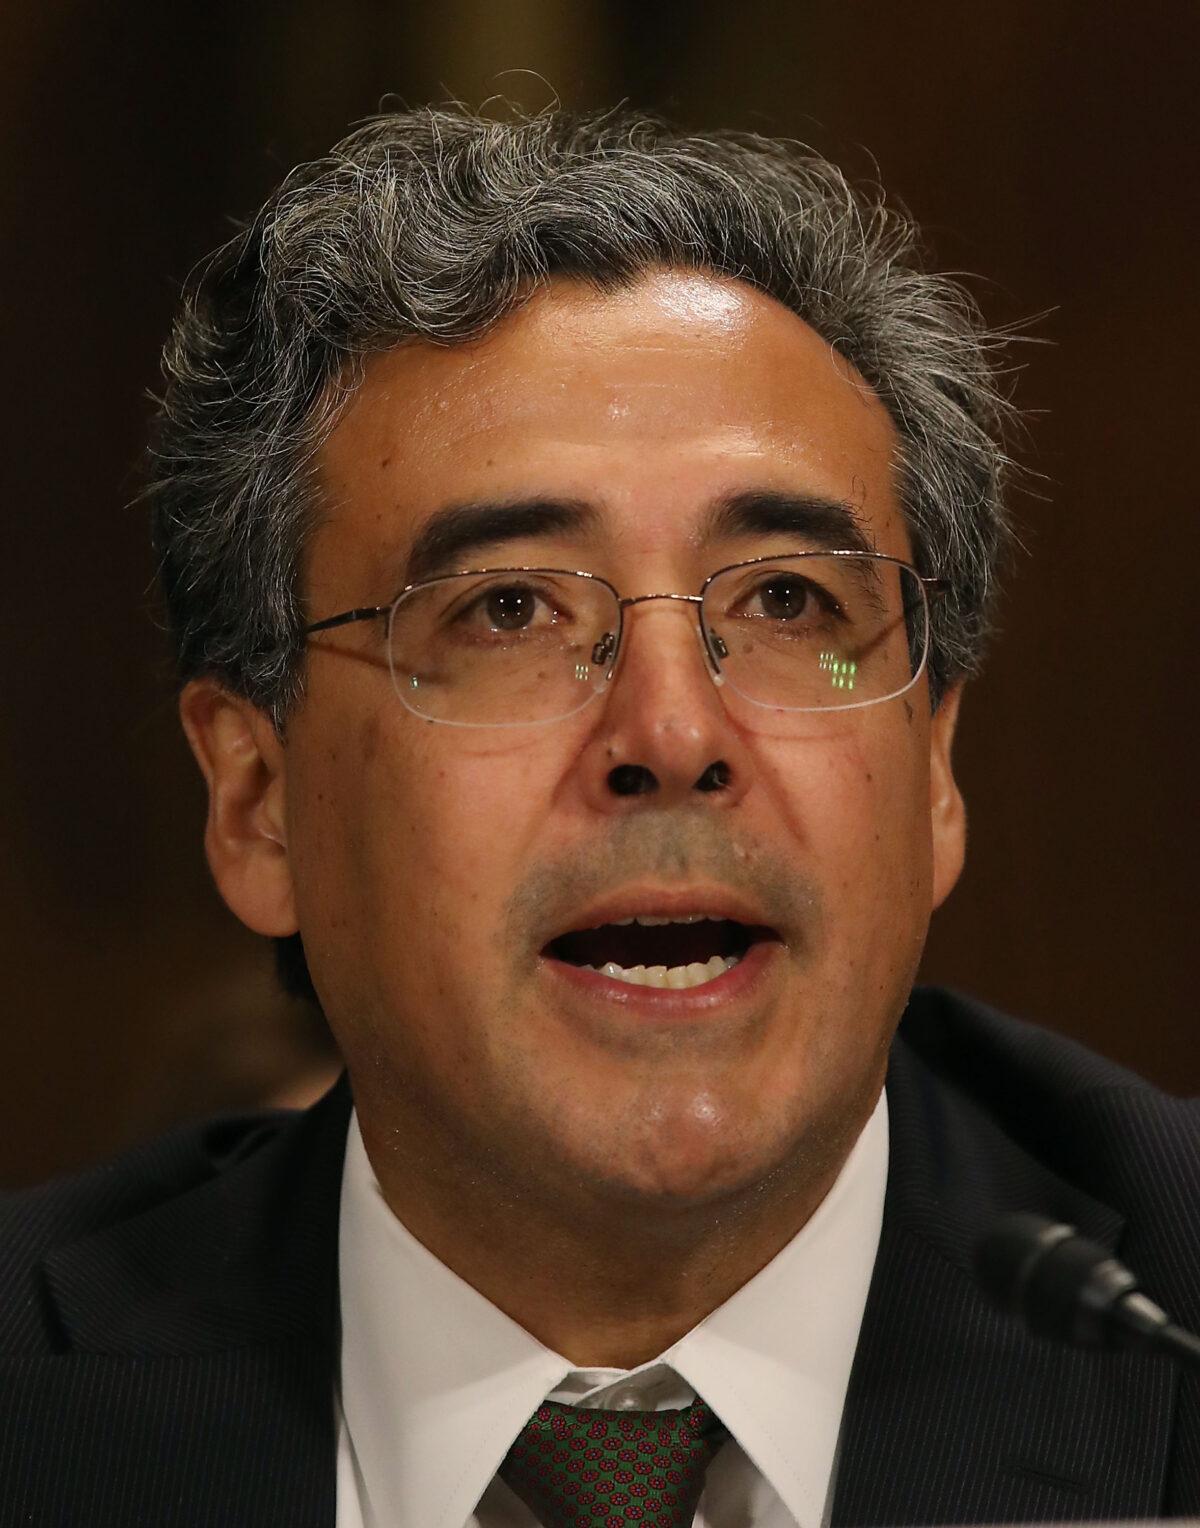 Solicitor General nominee Noel Francisco speaks during his Senate Judiciary Committee confirmation hearing on Capitol Hill in Washington on May 10, 2017. (Mark Wilson/Getty Images)